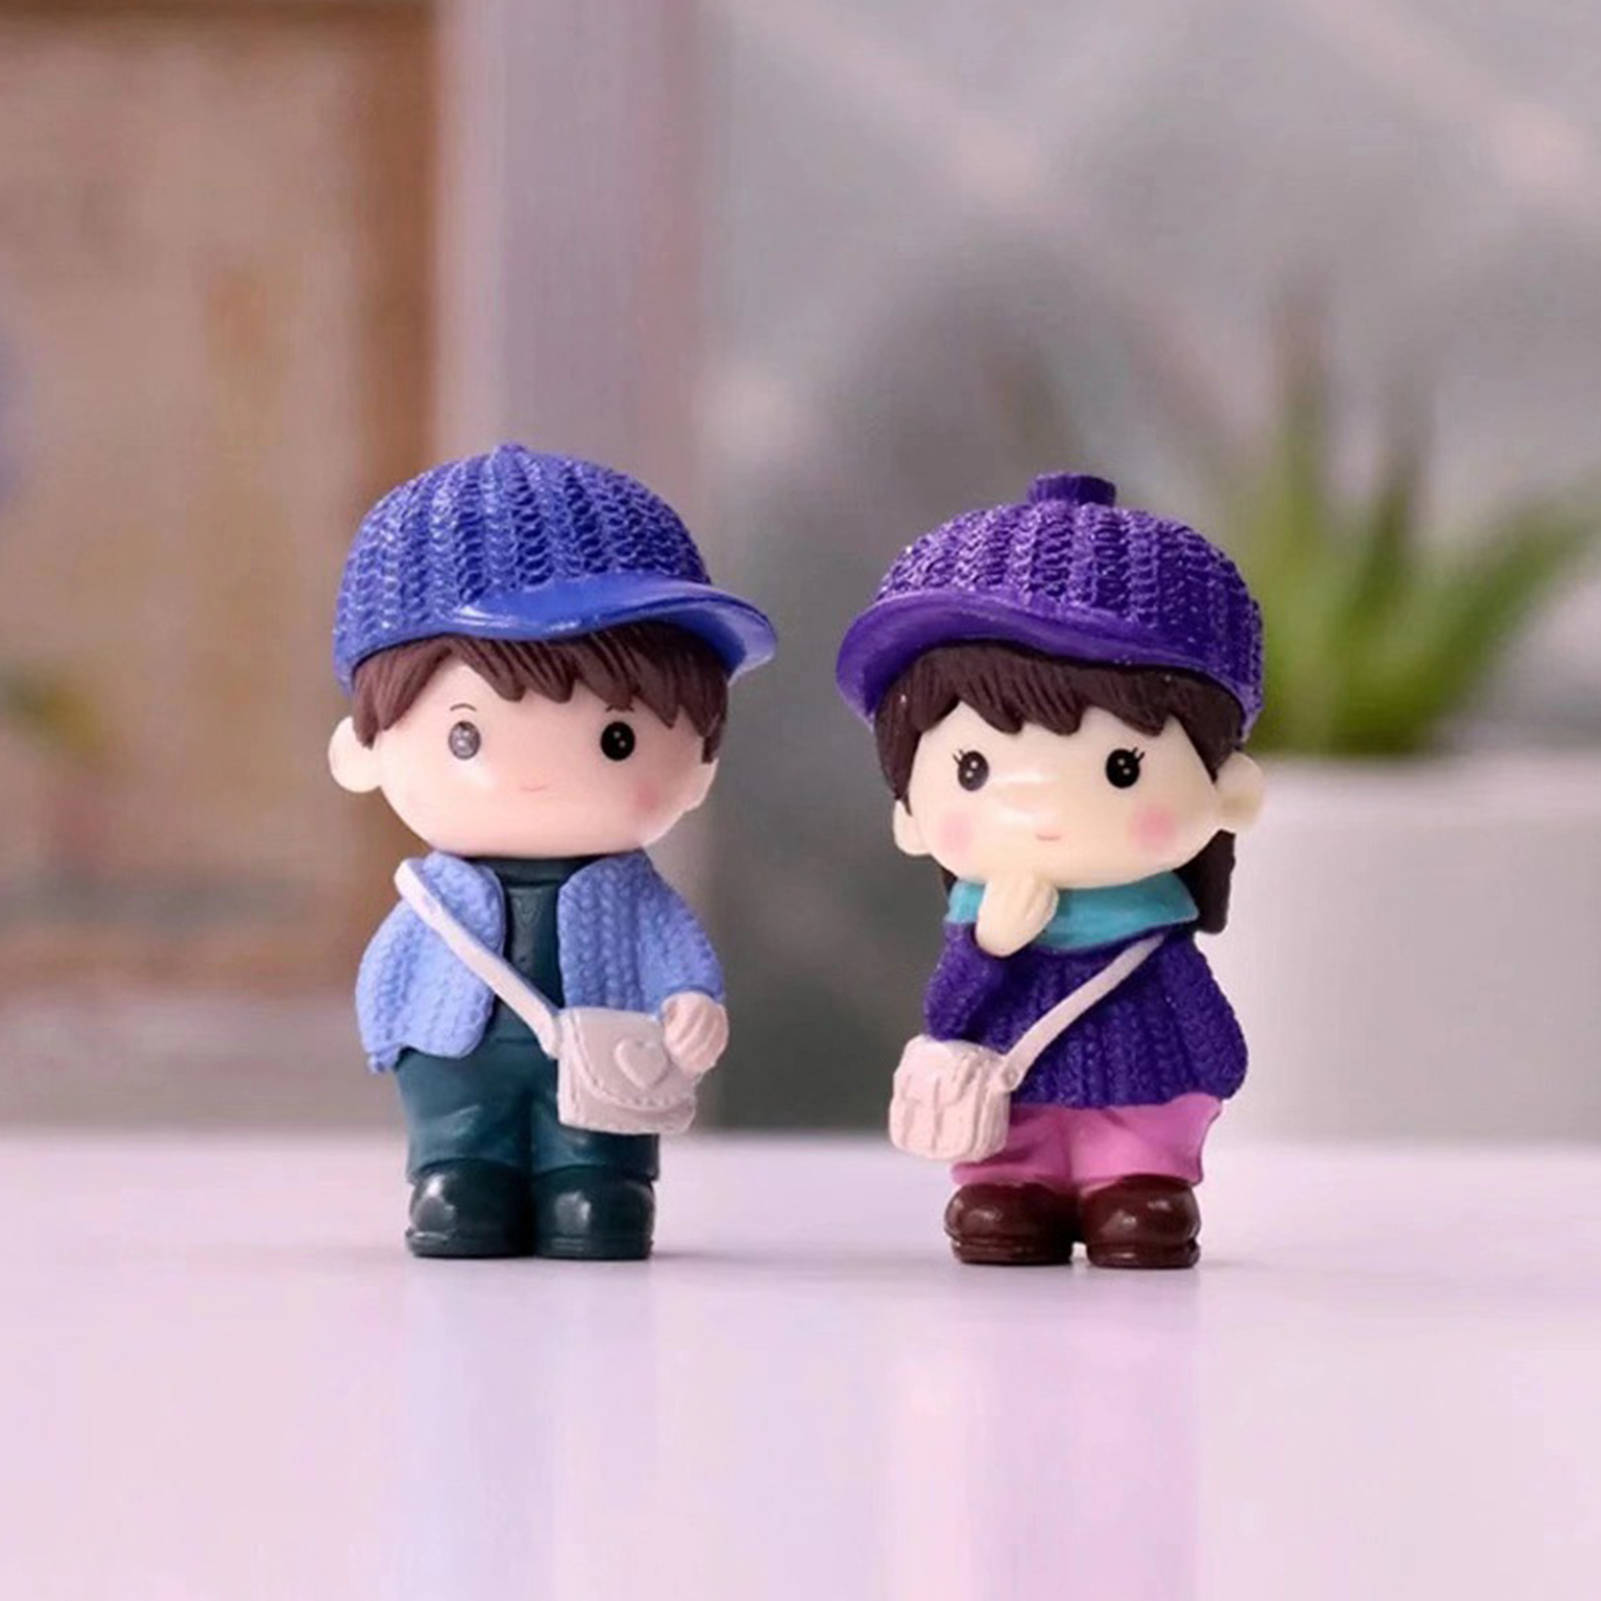 Cute Doll Couple With Purple Hats Wallpaper